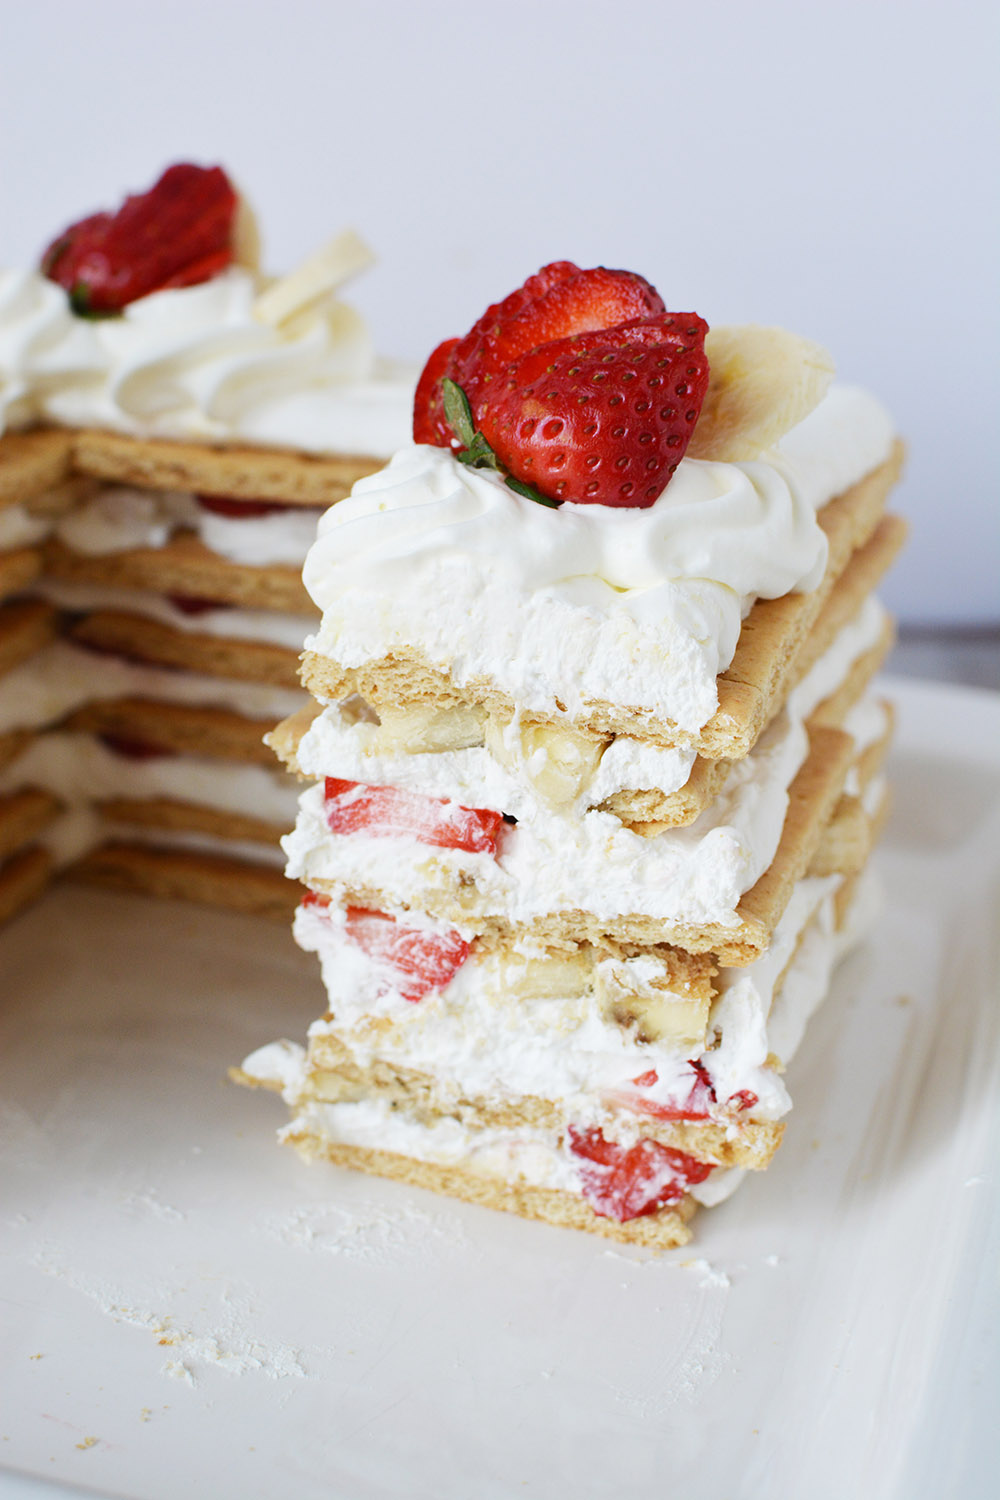 Sliced and layered ice box cake with strawberries.